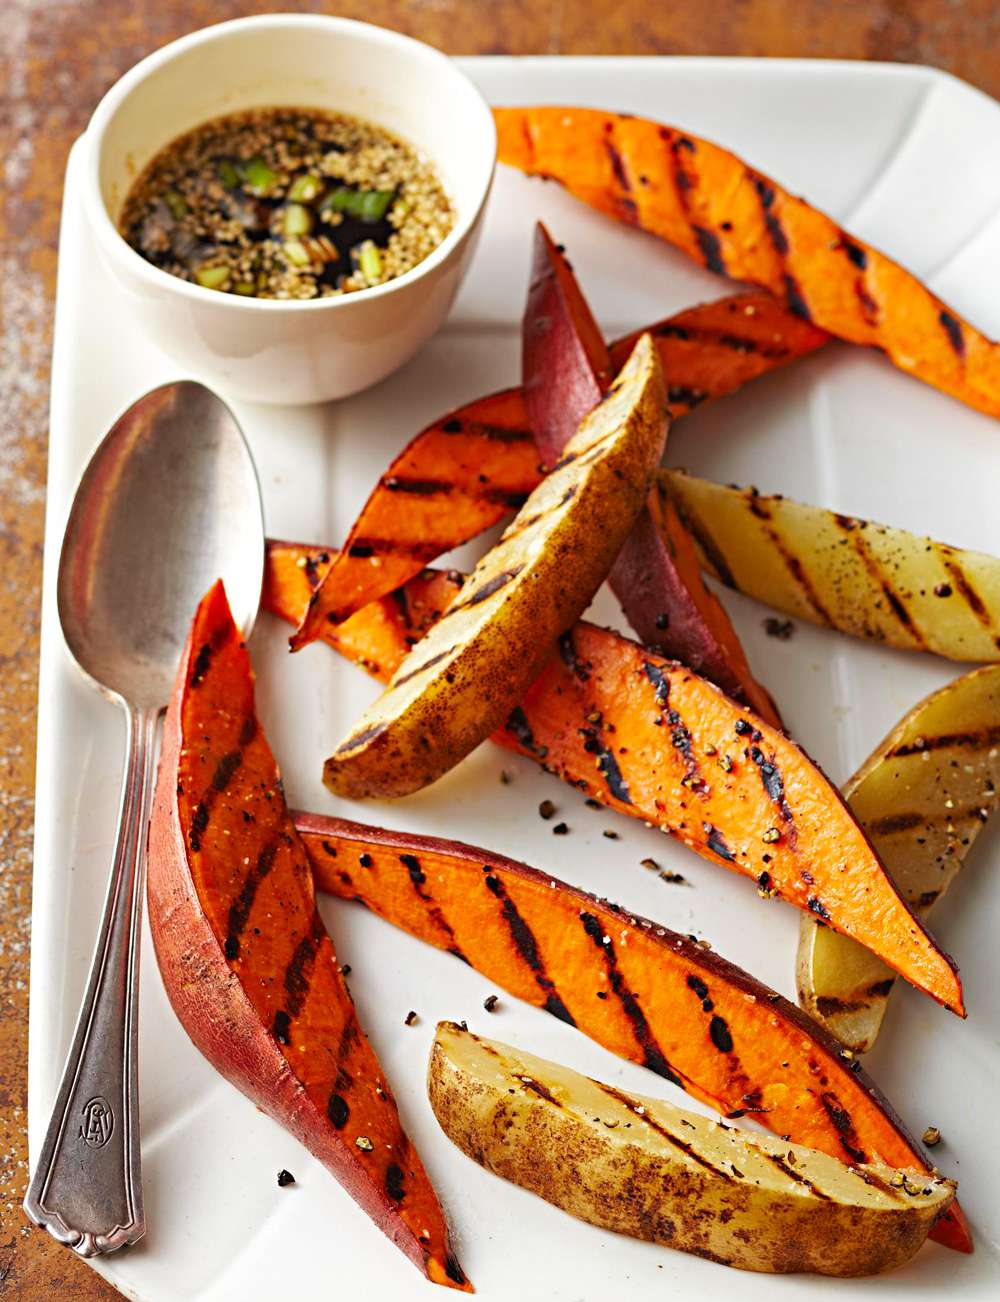 Grilled Sweet Potato Wedges with Dipping Sauces